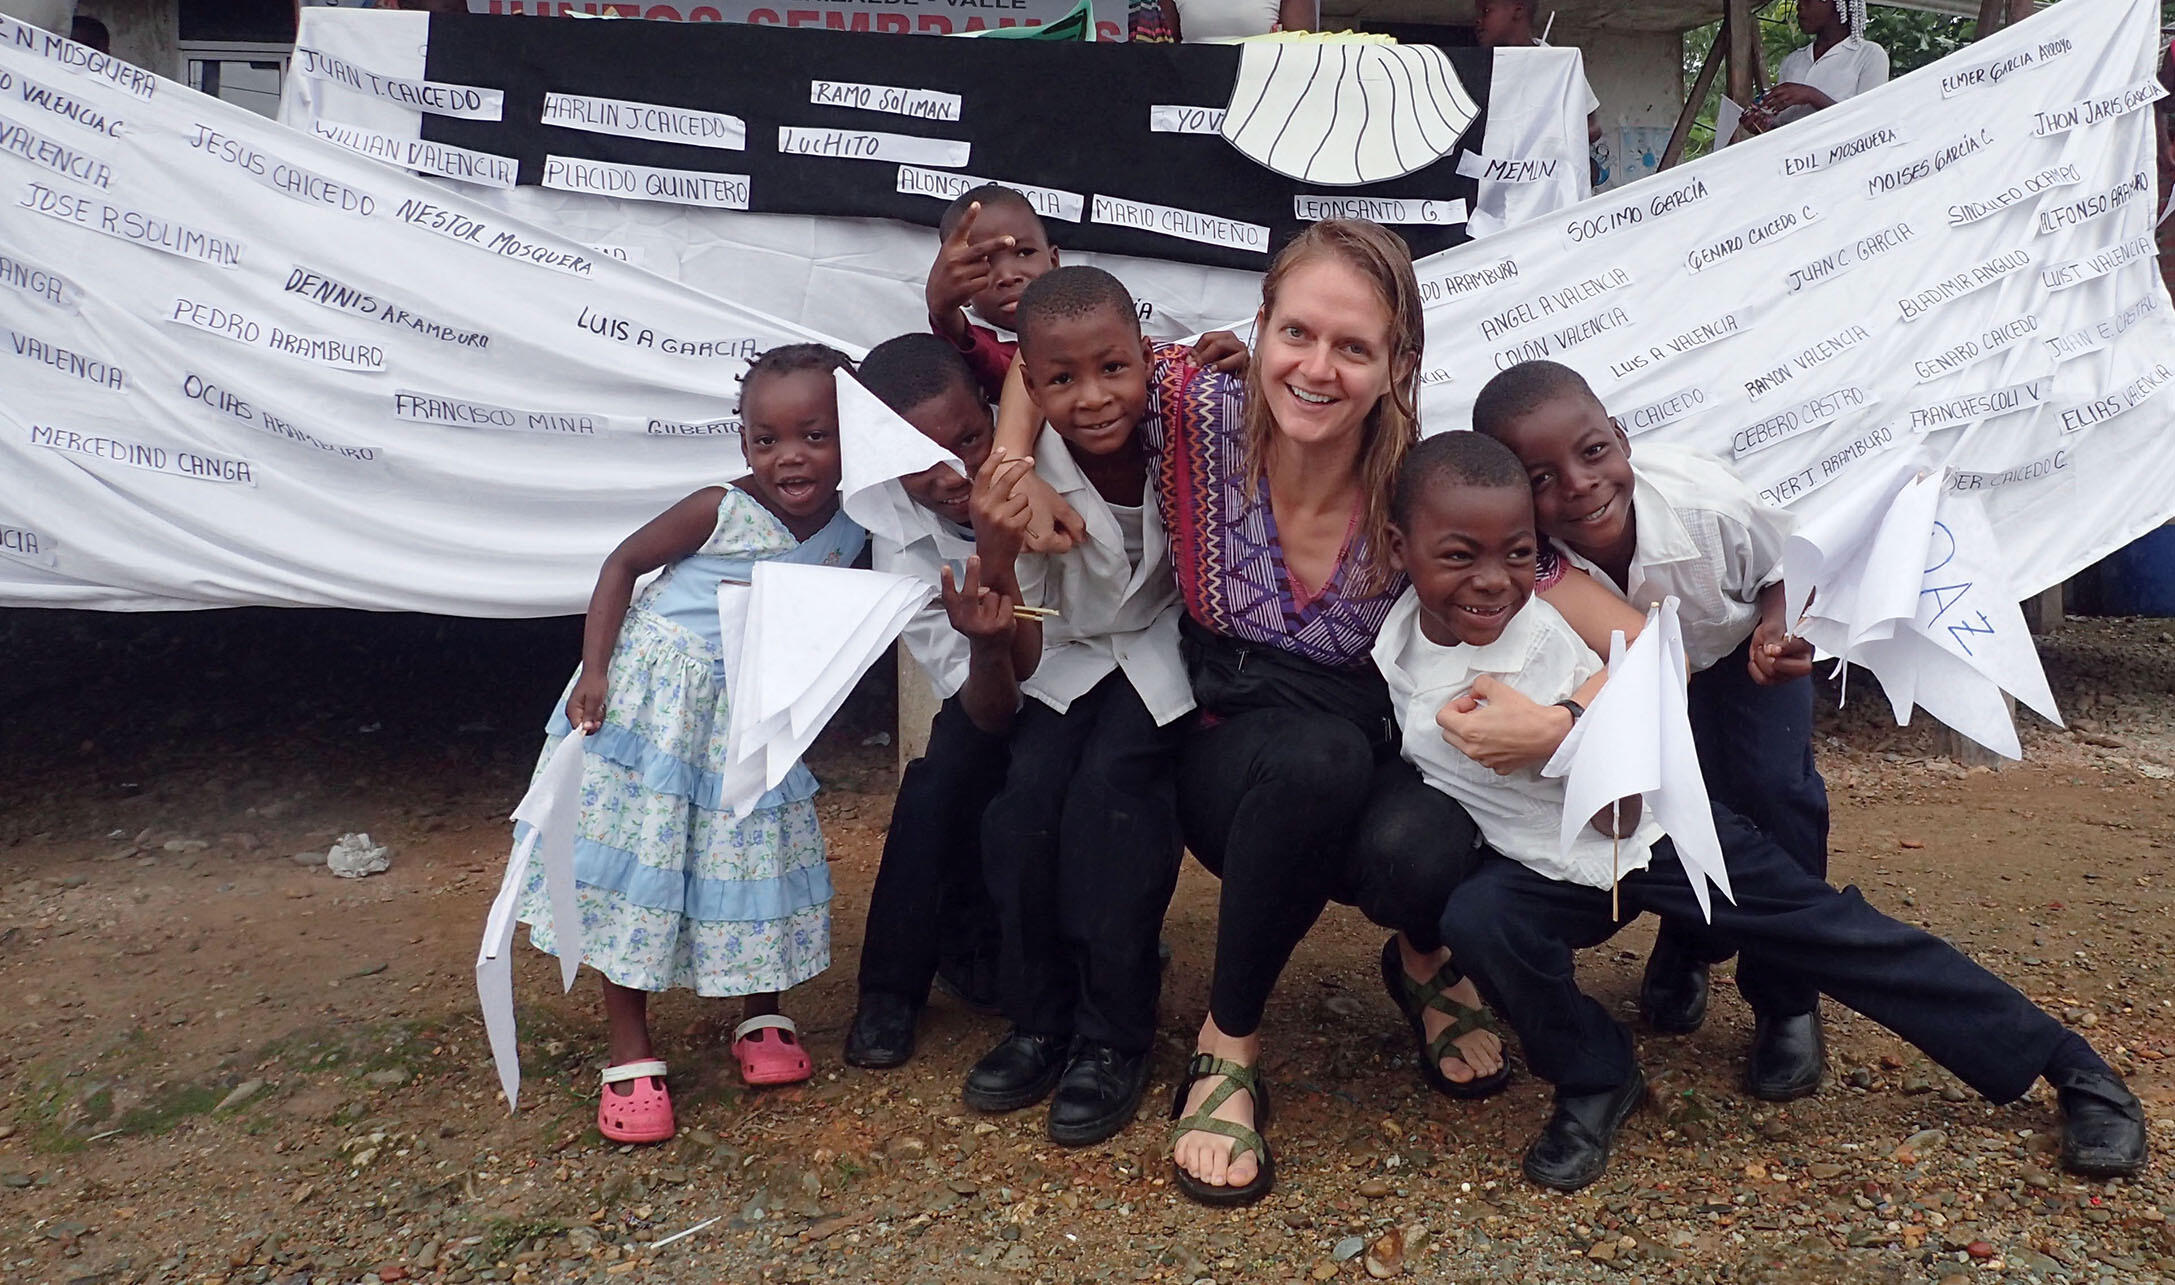 Author Lauren Withey with a group of Afro-Colombian children after a peace march with a banner bearing the names of local victims of the conflict. (Photo courtesy of Lauren Withey.)